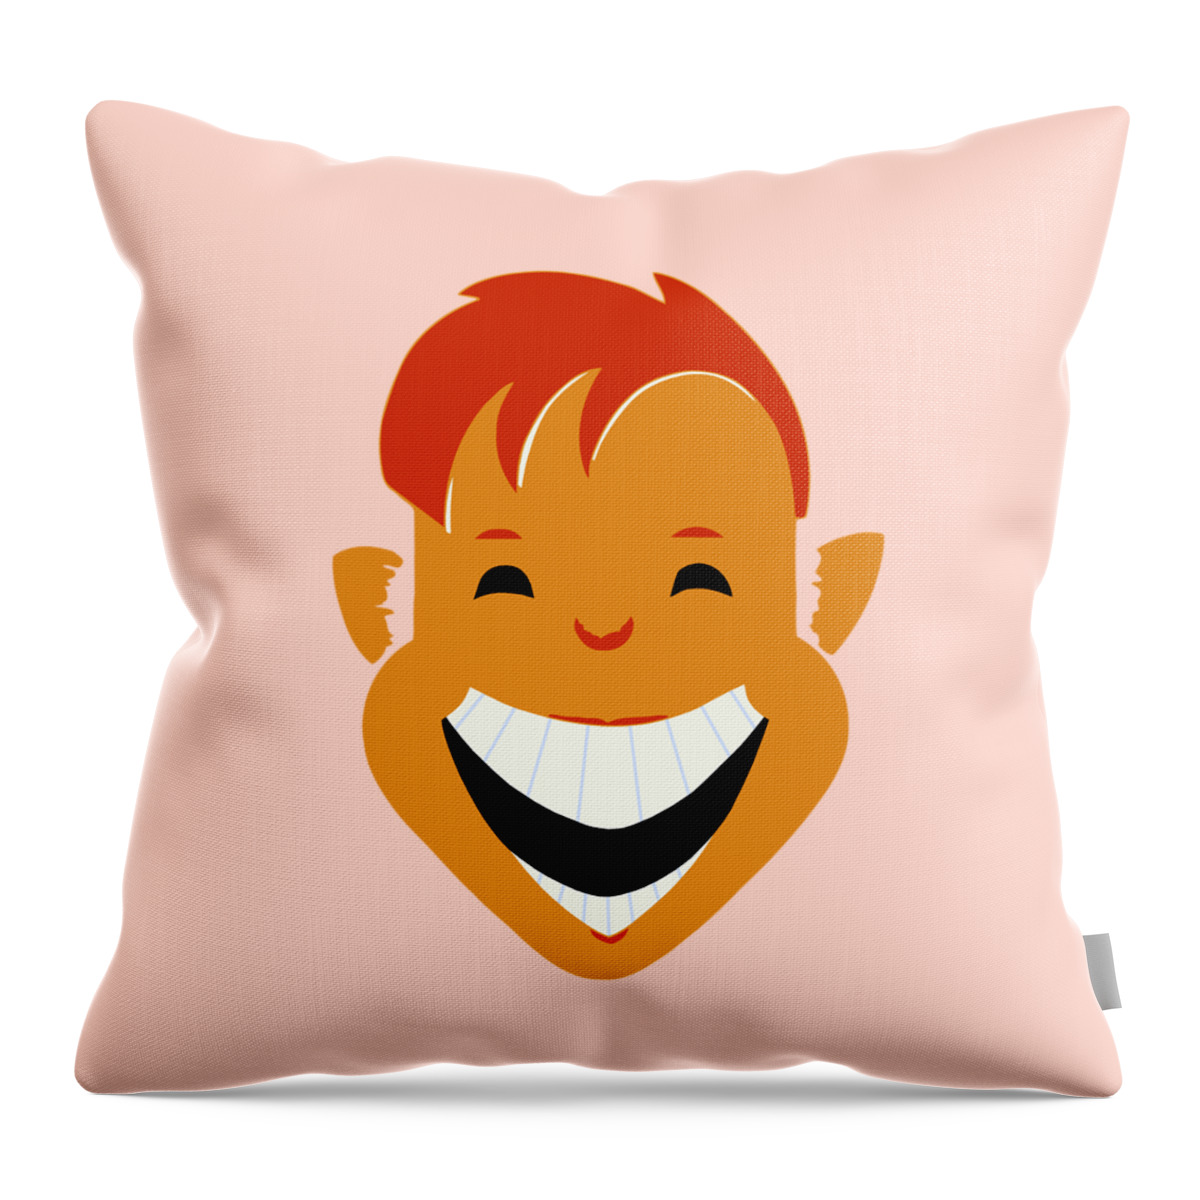  Throw Pillow featuring the drawing Smile by Heidi De Leeuw